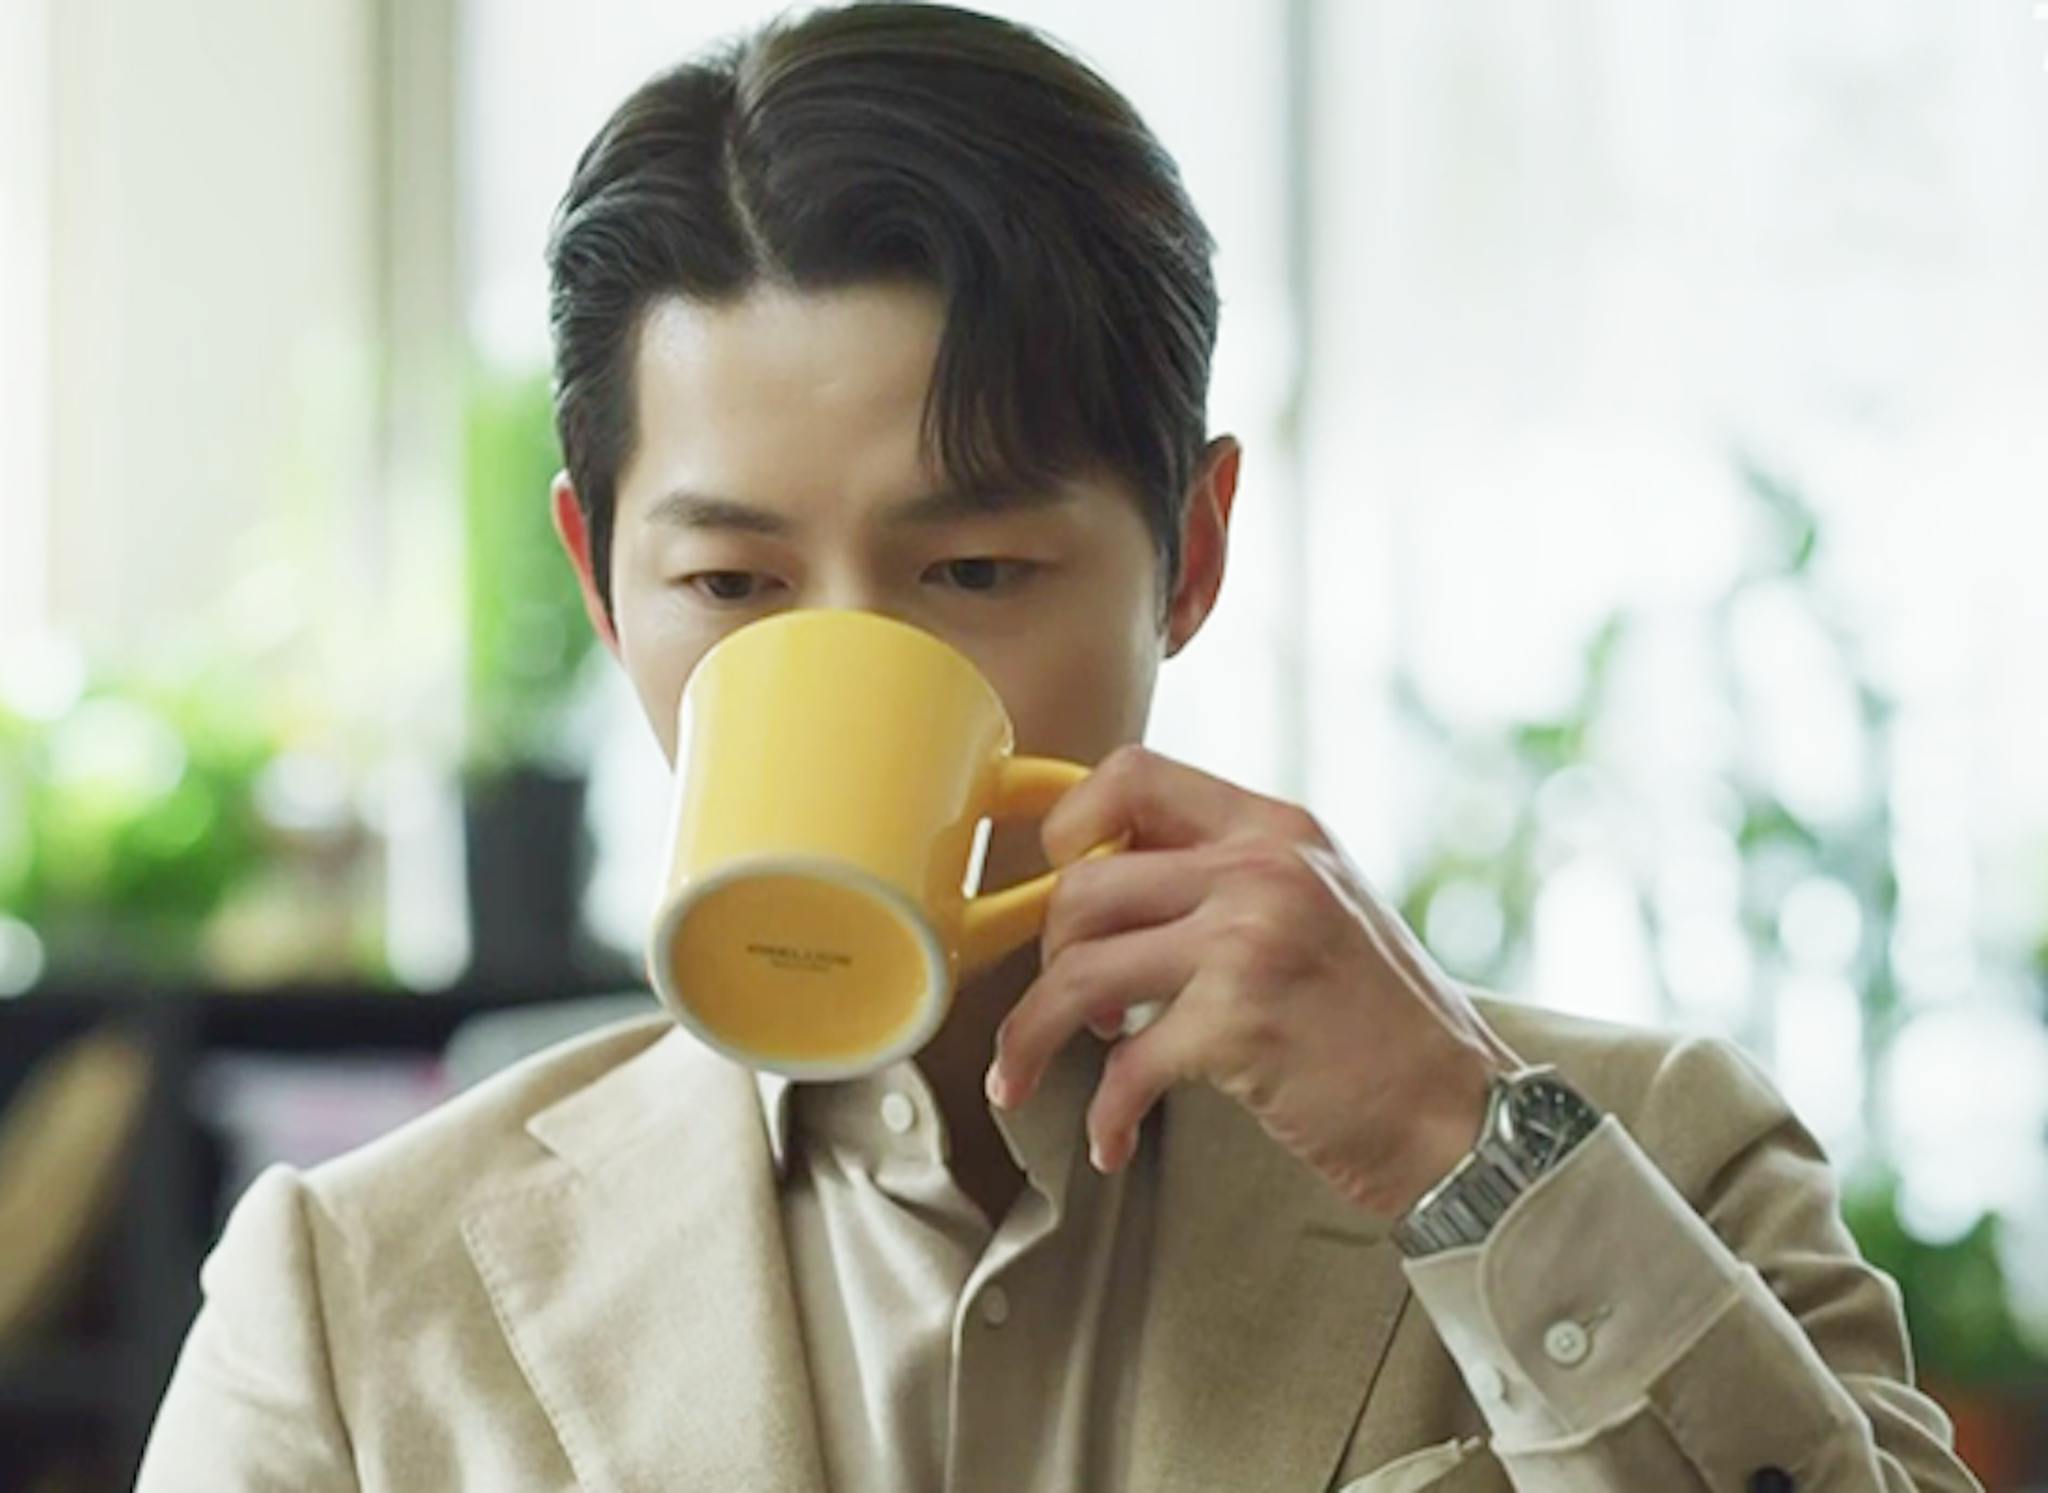 On the other side of the globe… a look at product placement in a Korean  drama